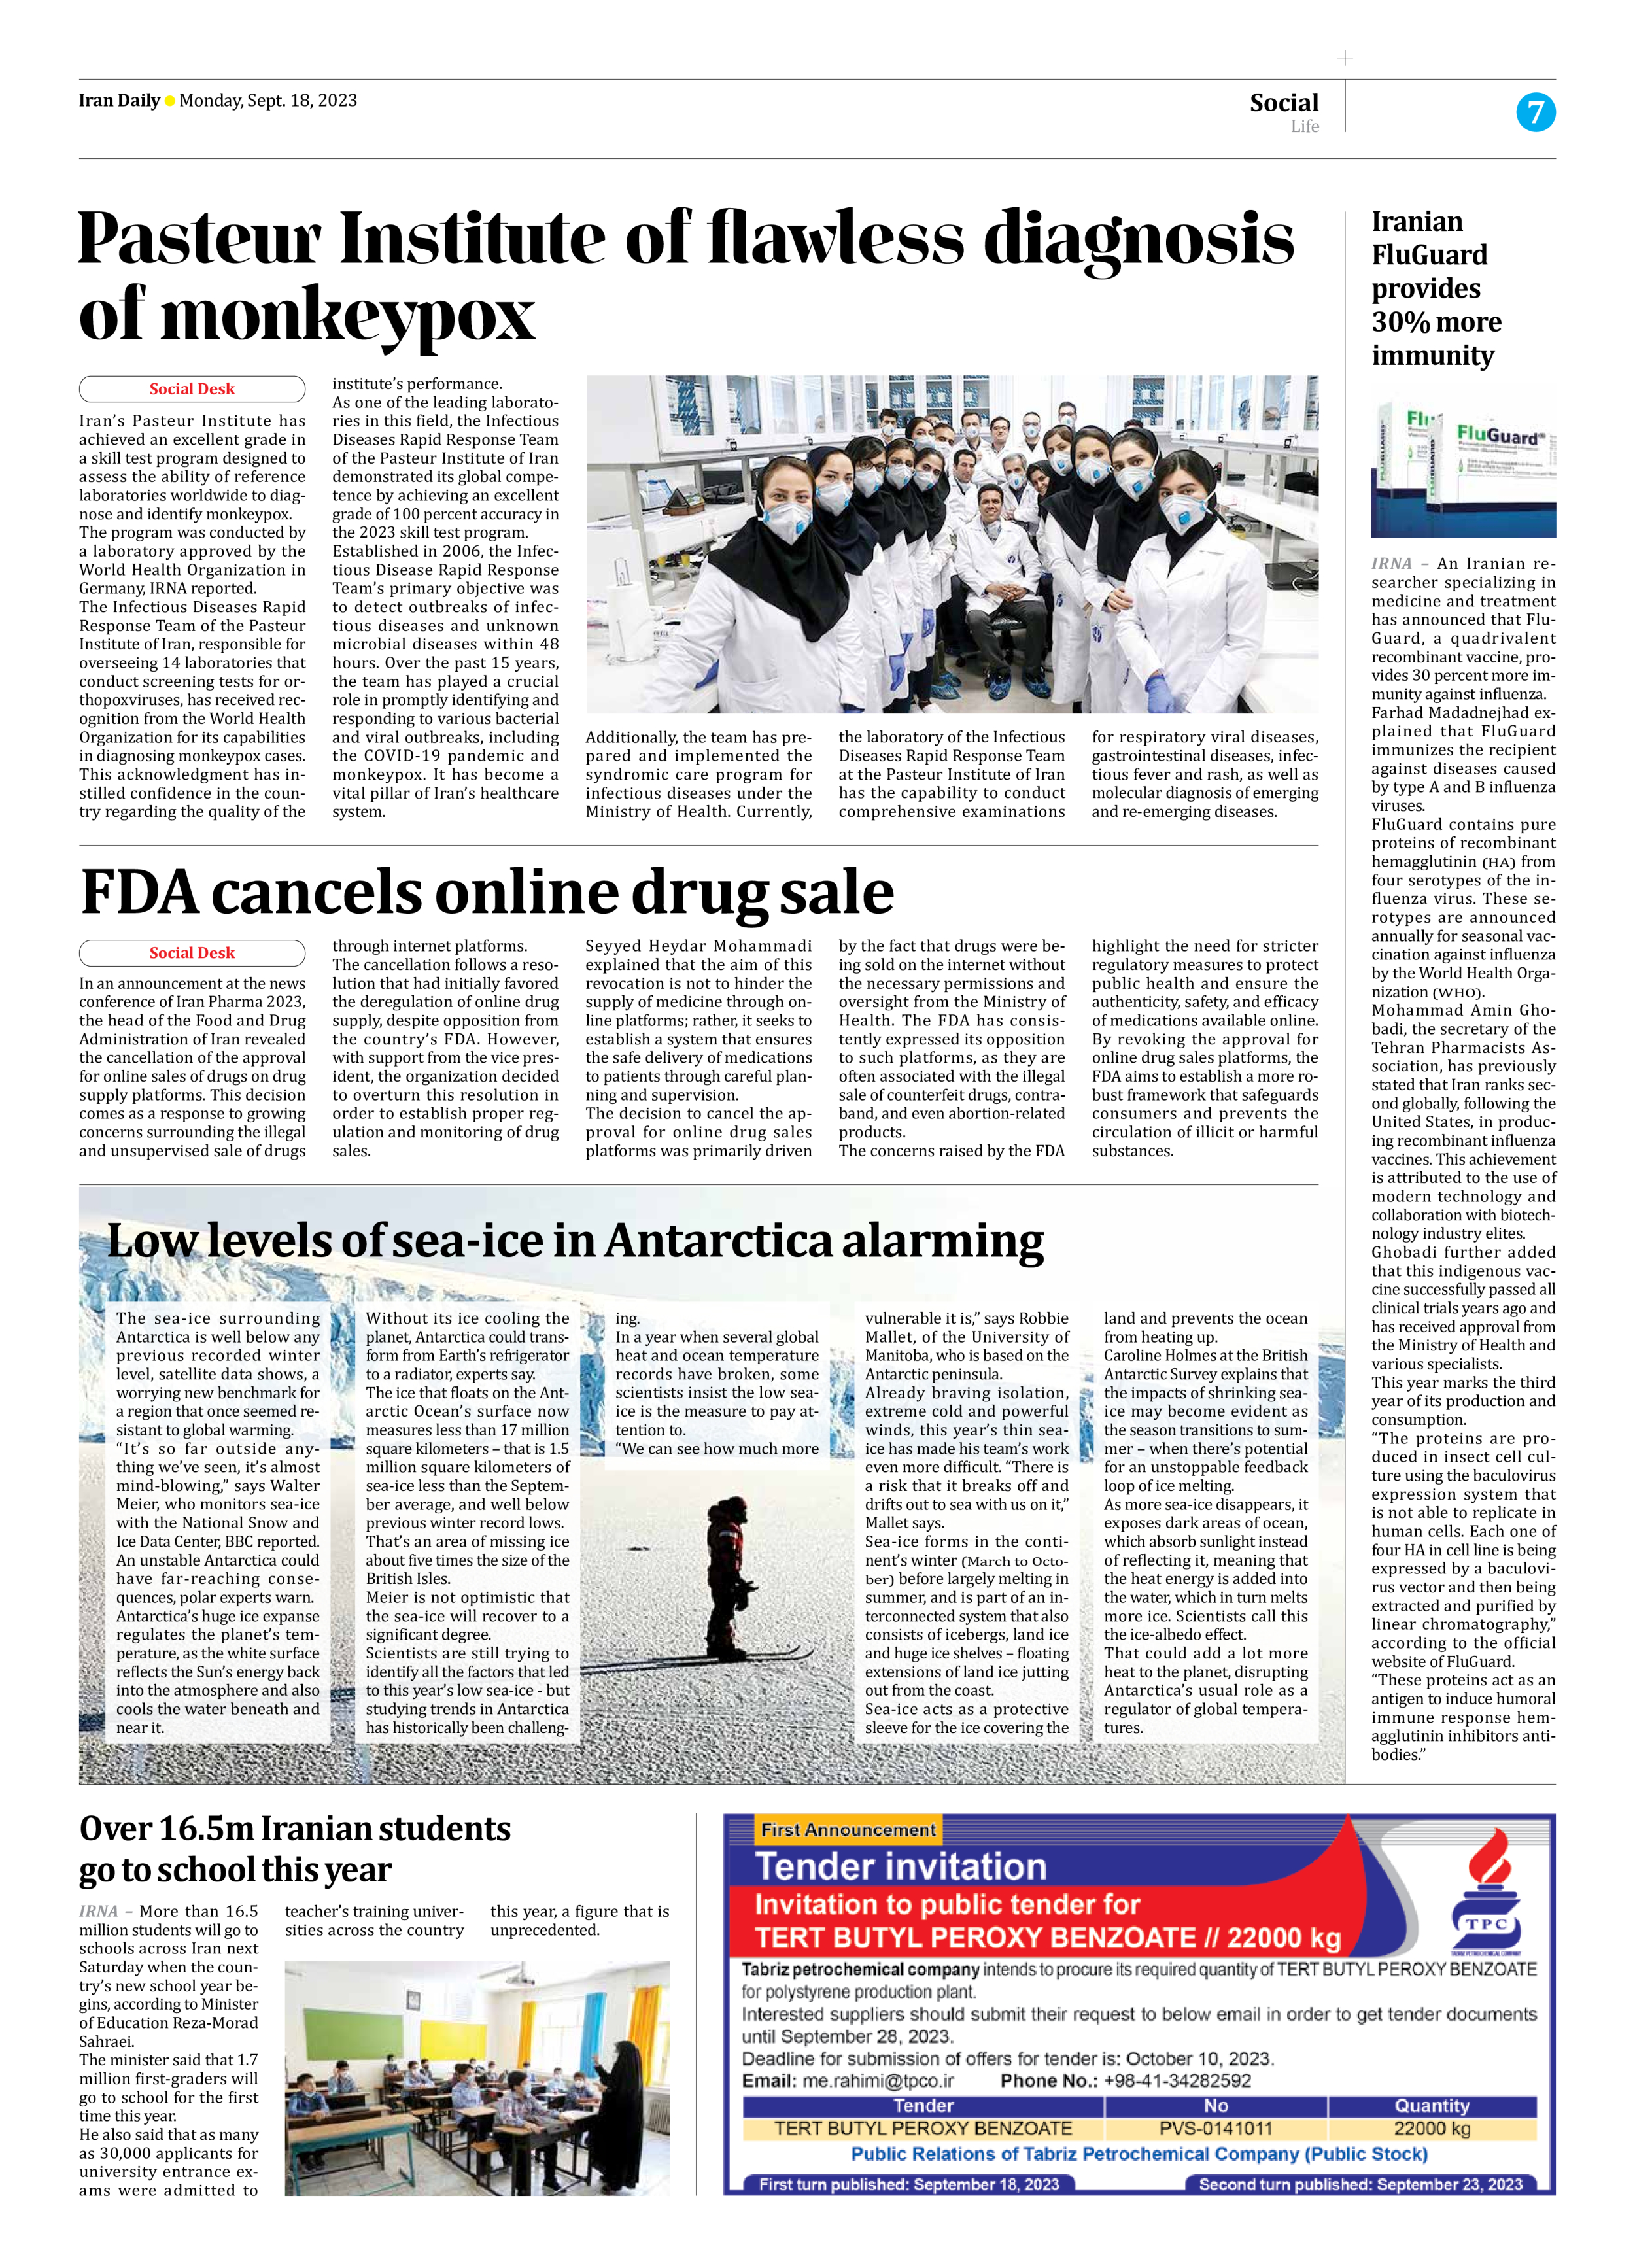 Iran Daily - Number Seven Thousand Three Hundred and Eighty Eight - 18 September 2023 - Page 7